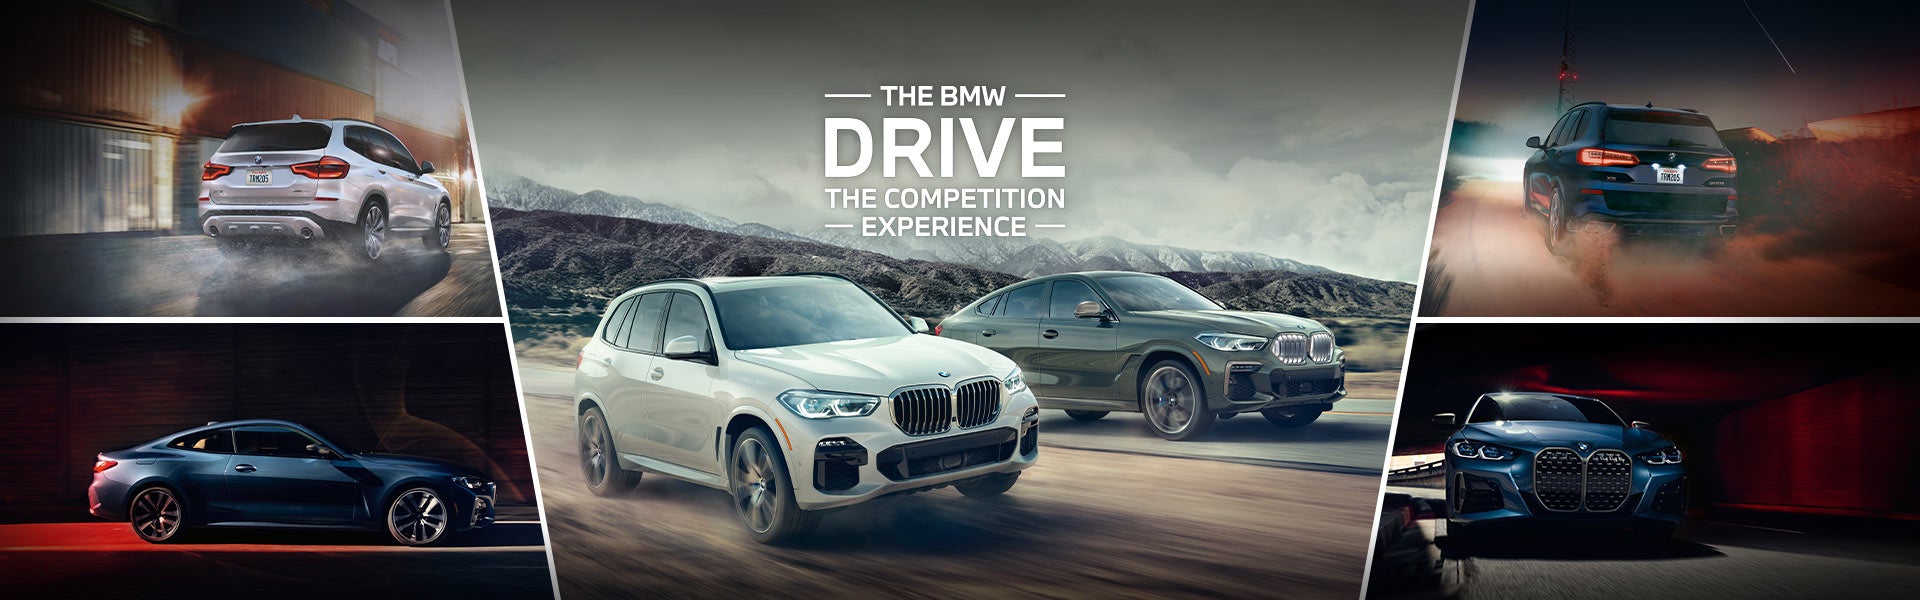 BMW Drive Competition Experience | Taylor BMW in Evans GA